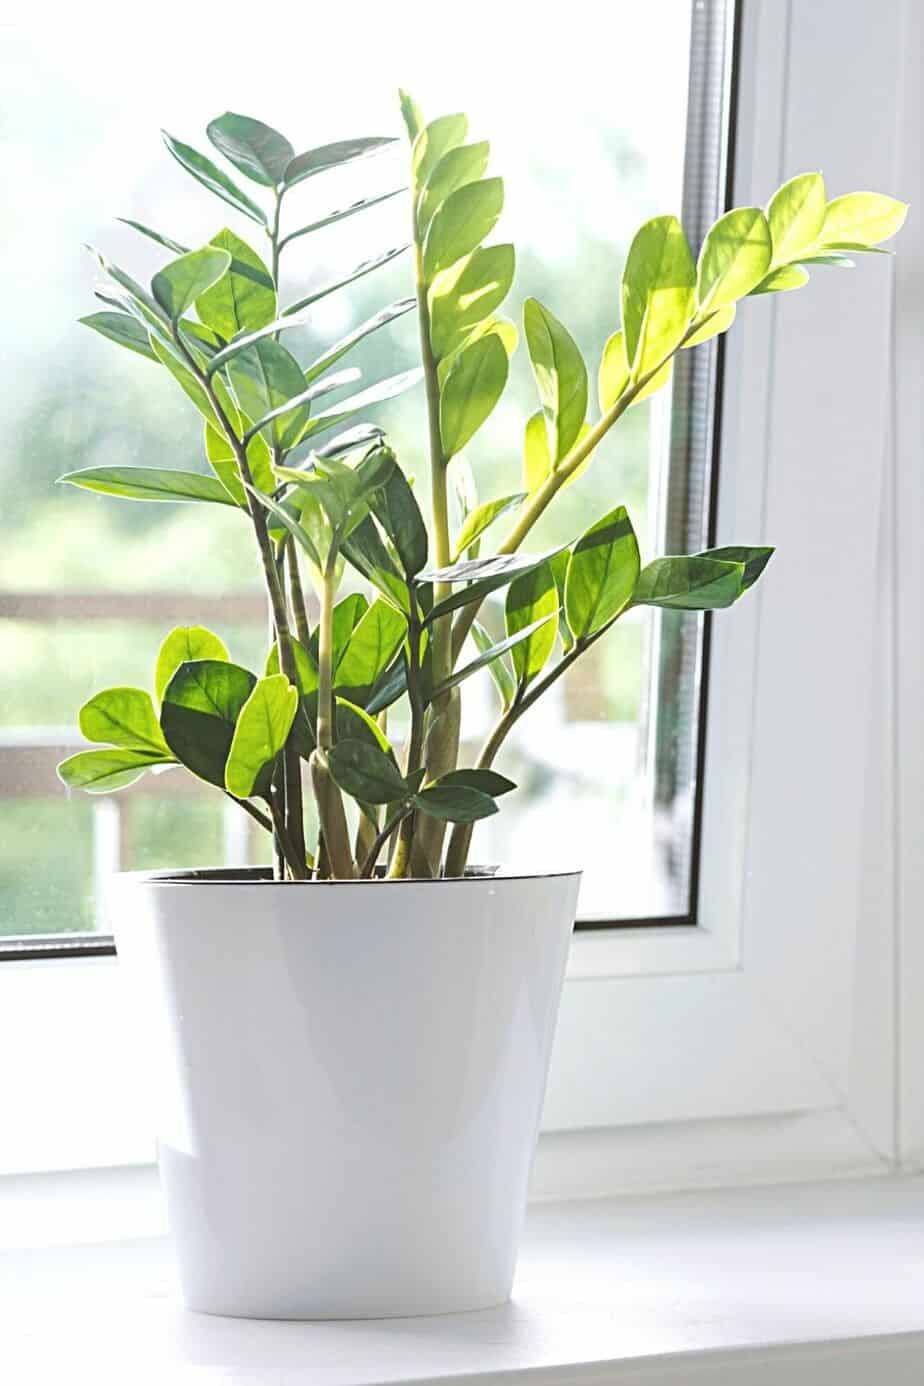 Place your ZZ plant in an area receiving more light to make it grow faster